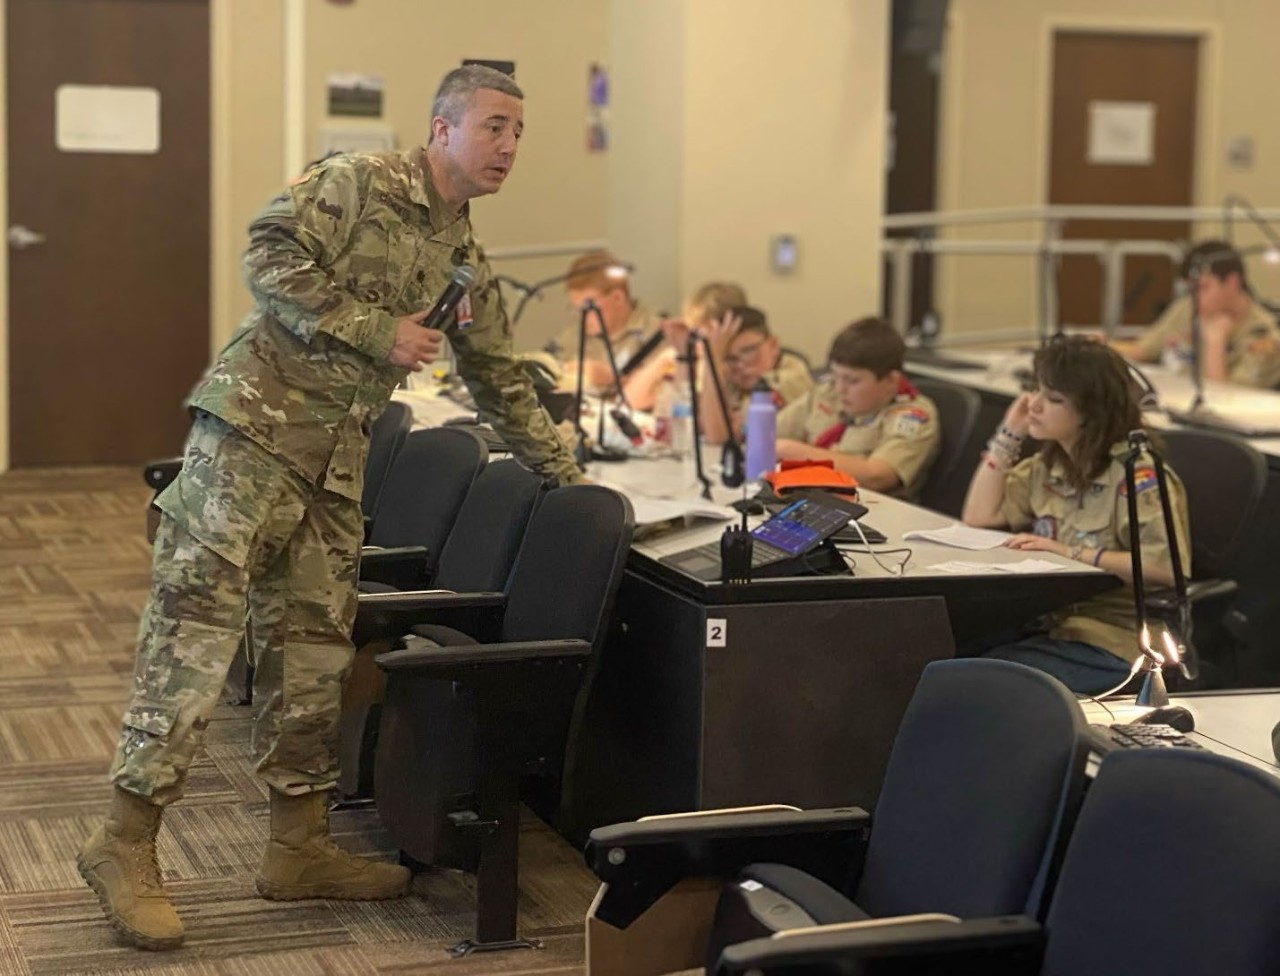 Lt. Col. Dallas Clements teaches the radio merit badge in the Joint Operations Center during the 3rd Annual Merit Badge University hosted by the Tennessee Military Department at Nashville’s Joint Force Headquarters, April 27. (photo by Staff Sgt. Matthew Brown)